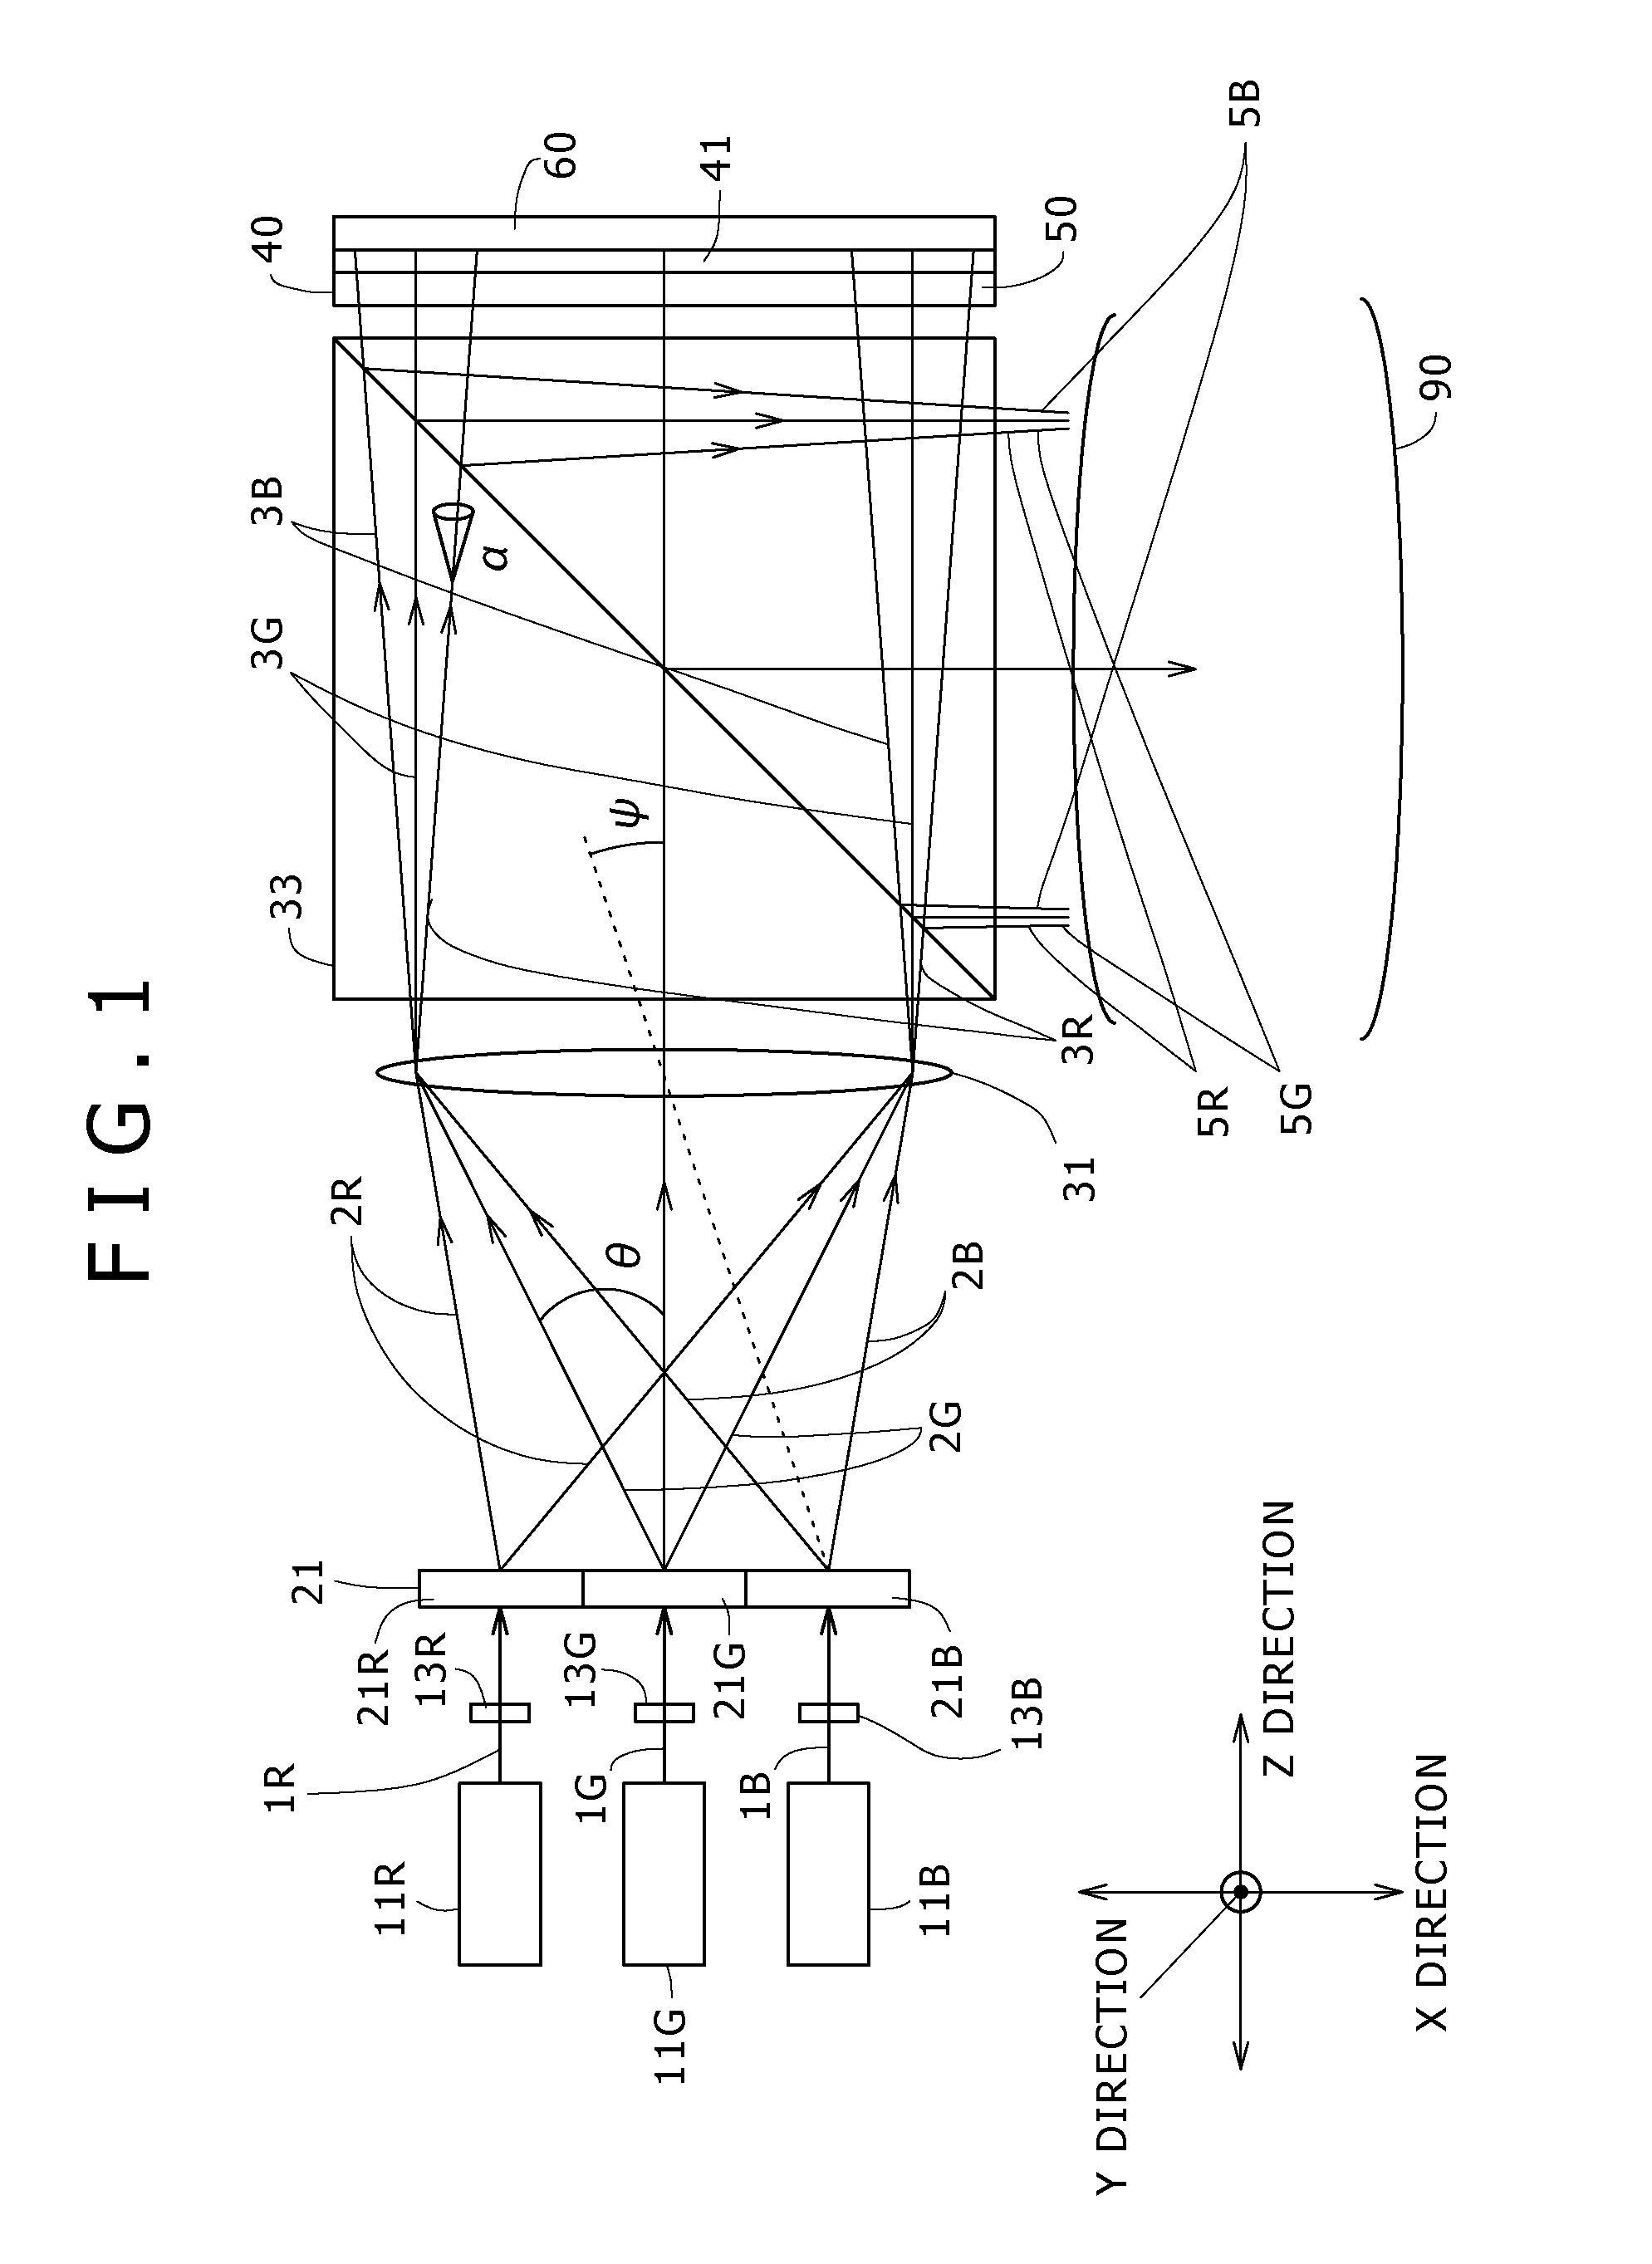 Reflective liquid crystal projector and image reproduction apparatus